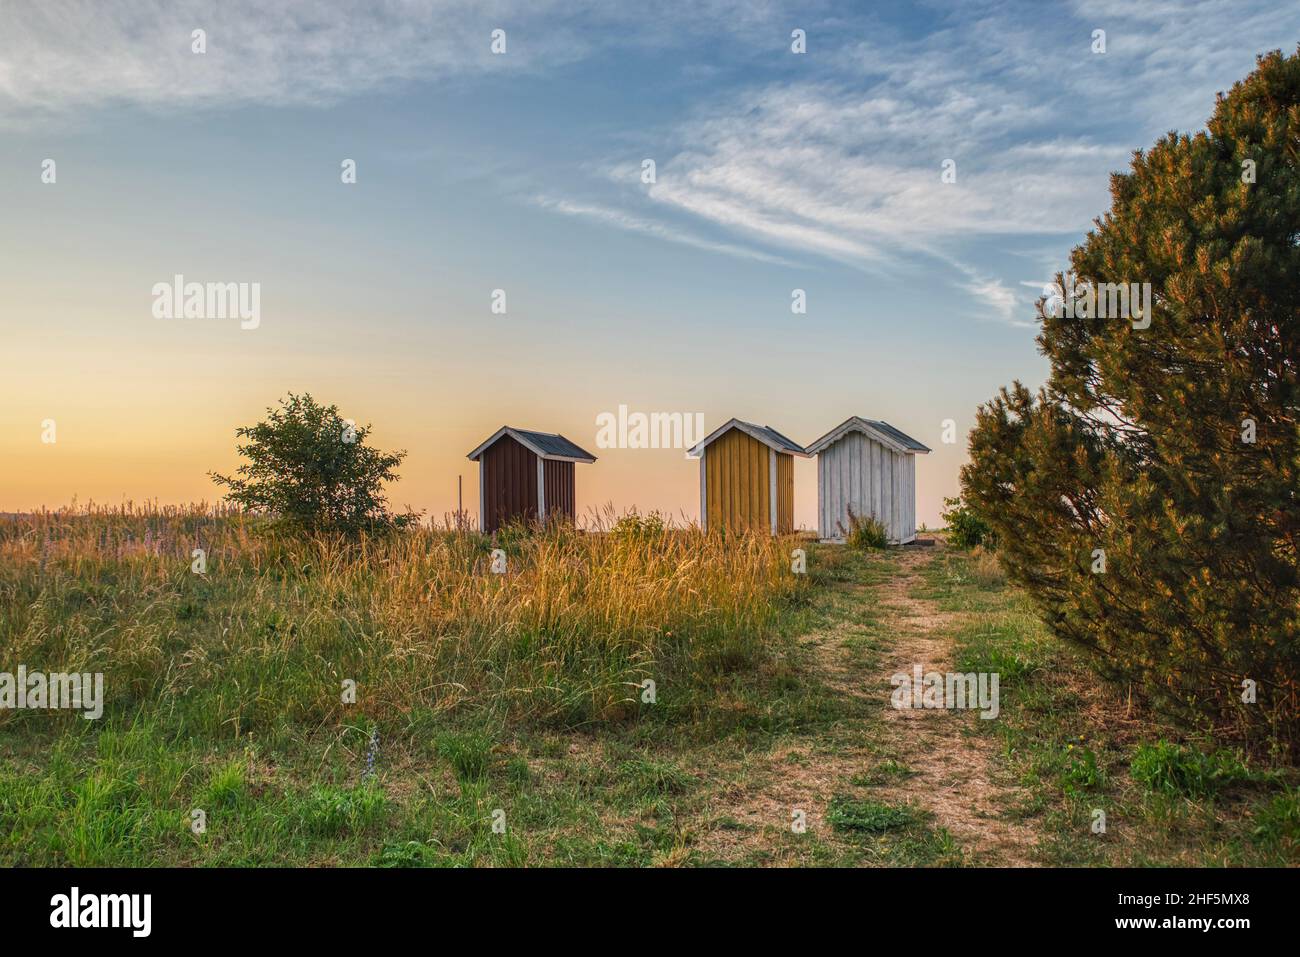 Three rustic summerhouses at sunset on a strand show nordic summer vacation. Scandinavian holiday houses illustration conveys a comfort zone concept Stock Photo